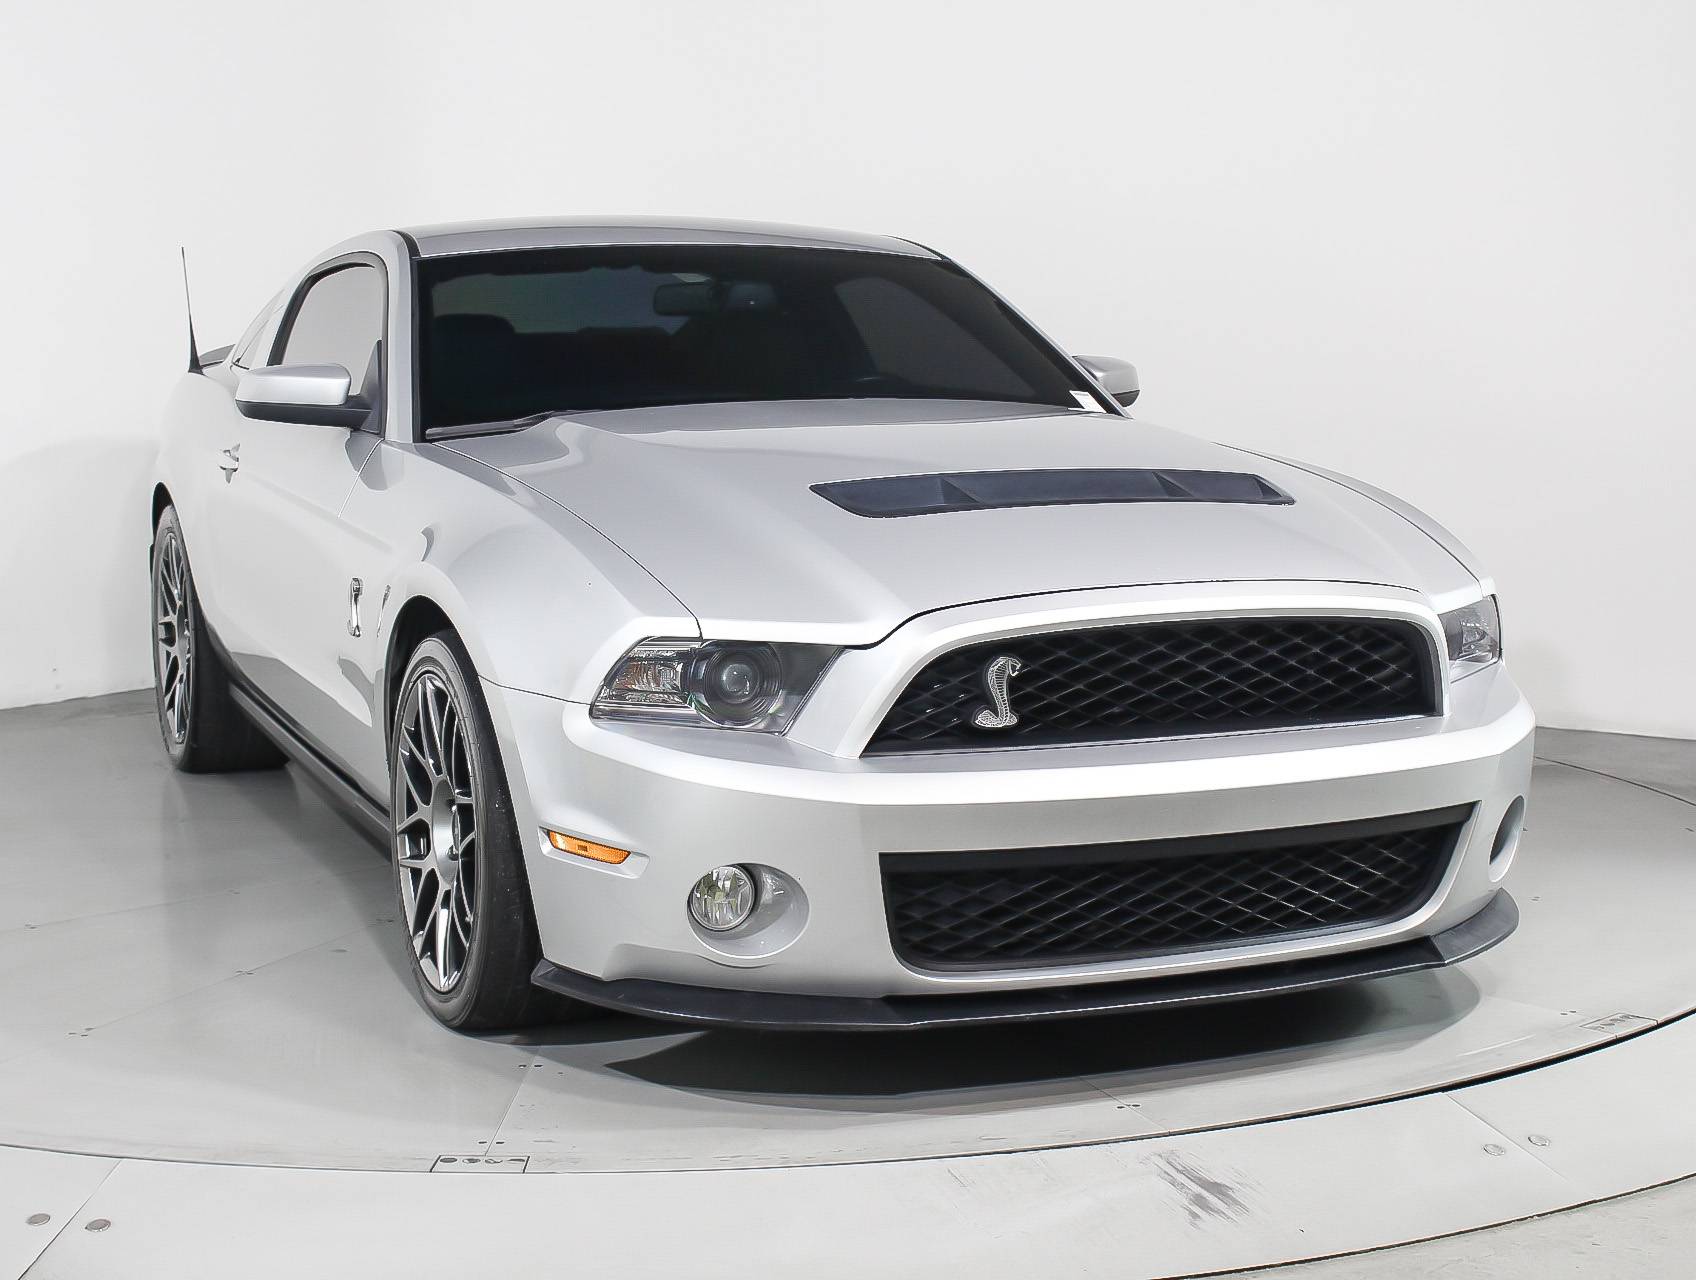 Florida Fine Cars - Used FORD MUSTANG SHELBY GT500 2012 MIAMI 